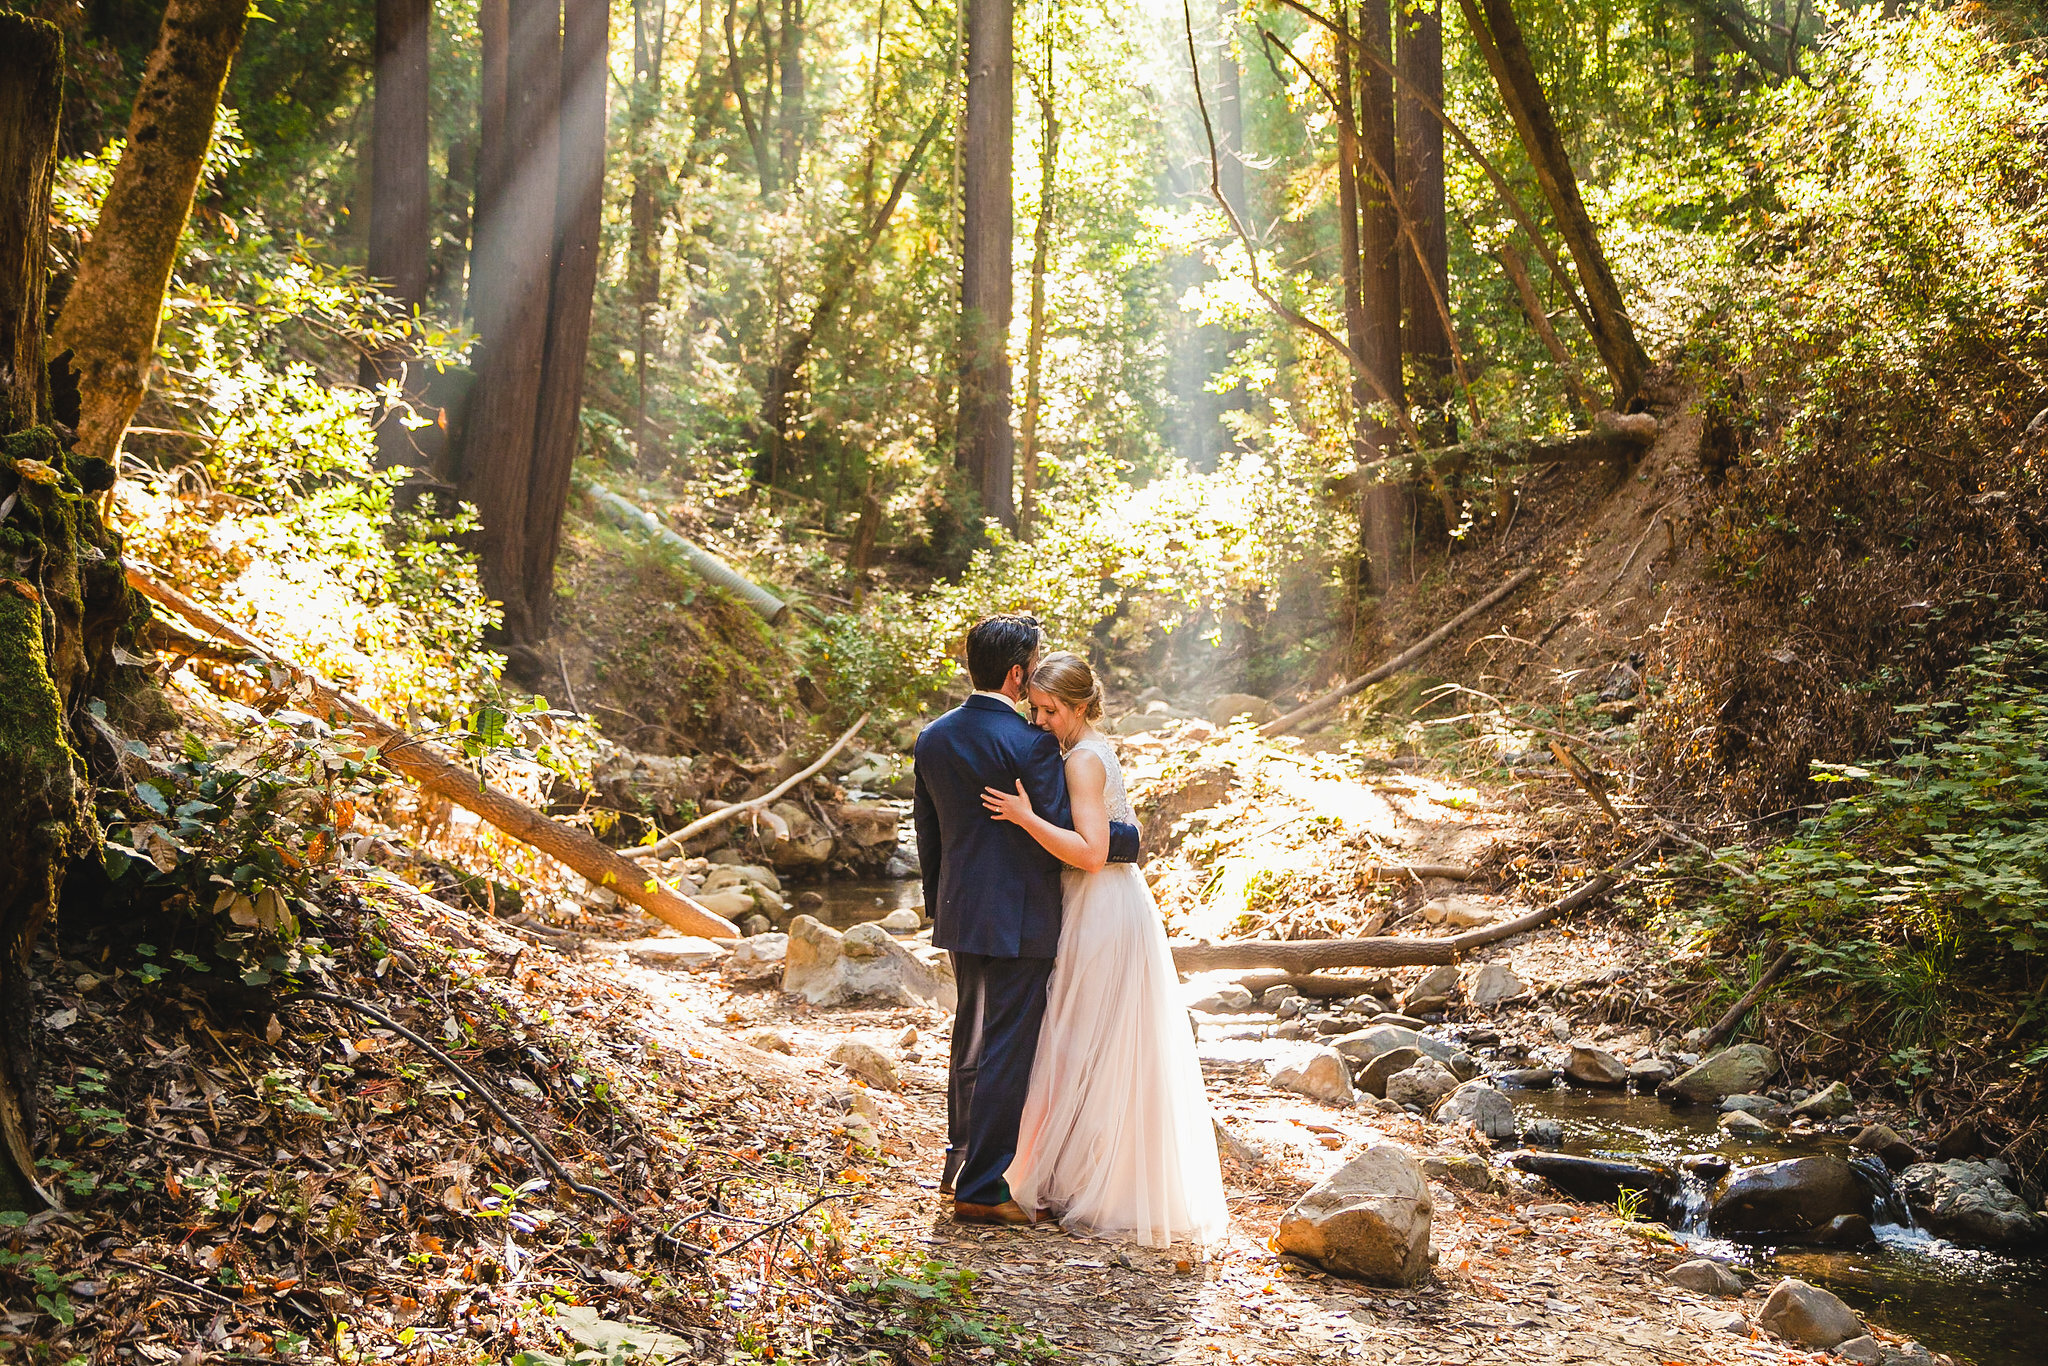 A wedding couple quietly stand in the woods as sunbeams shine down through the trees.